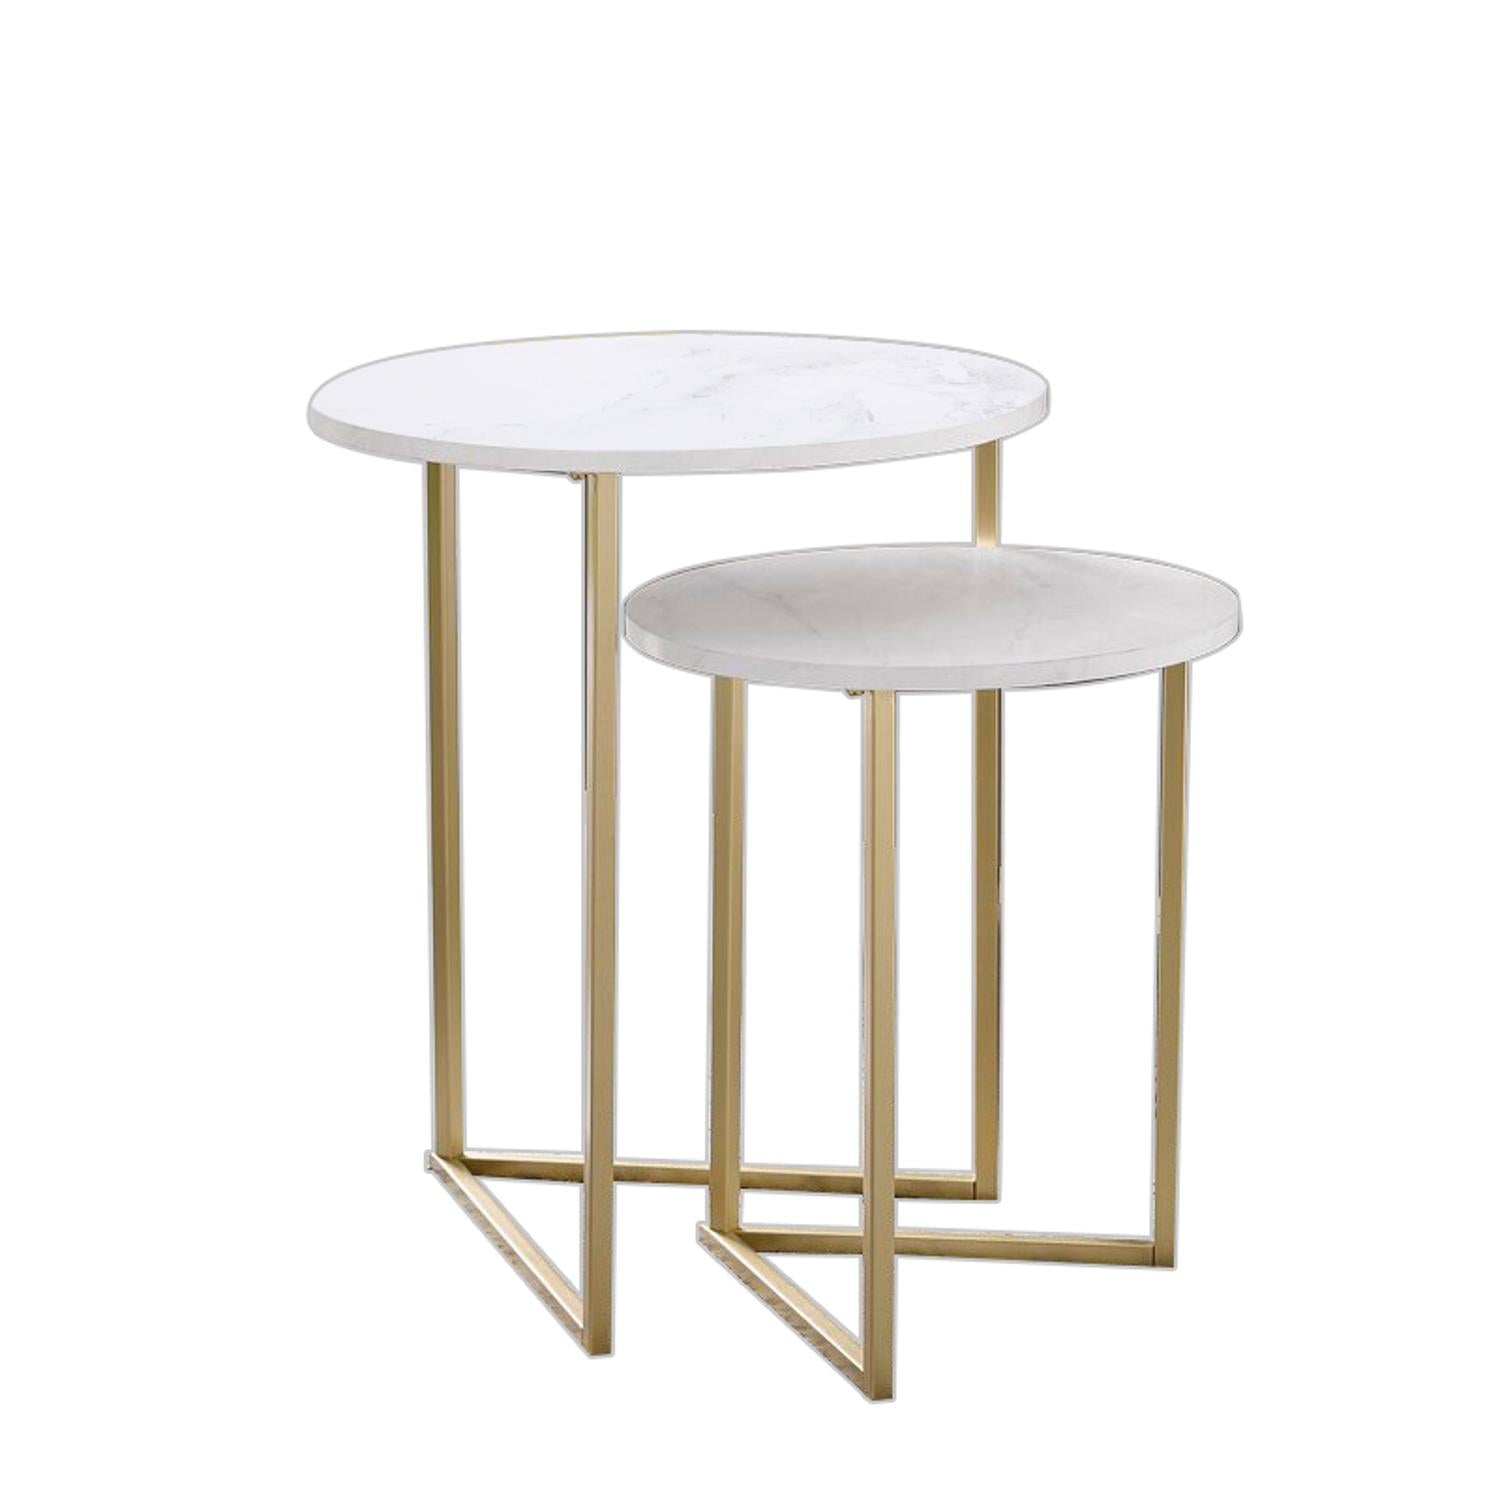 ViscoLogic V-Shaped Marble Top Nesting Coffee Tables, End Tables, Metal Frame Side Tables For Living Room, Bedrrom,Balcony (Golden Yellow)